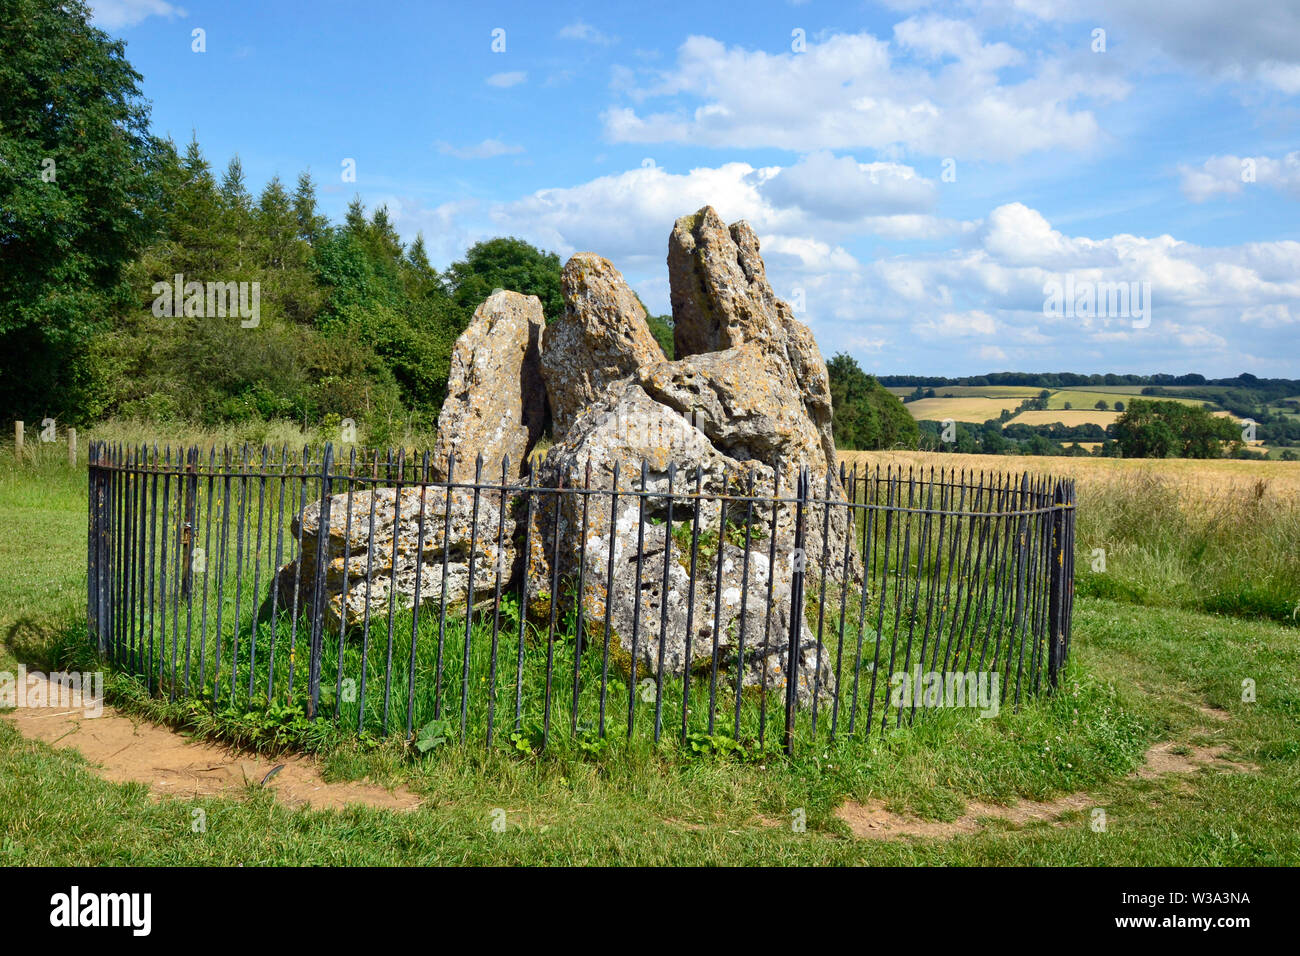 Le Whispering Knight chambre funéraire, le Rollright Stones, Pierre Cour, Grande Rollright, Chipping Norton, Oxfordshire, UK Banque D'Images